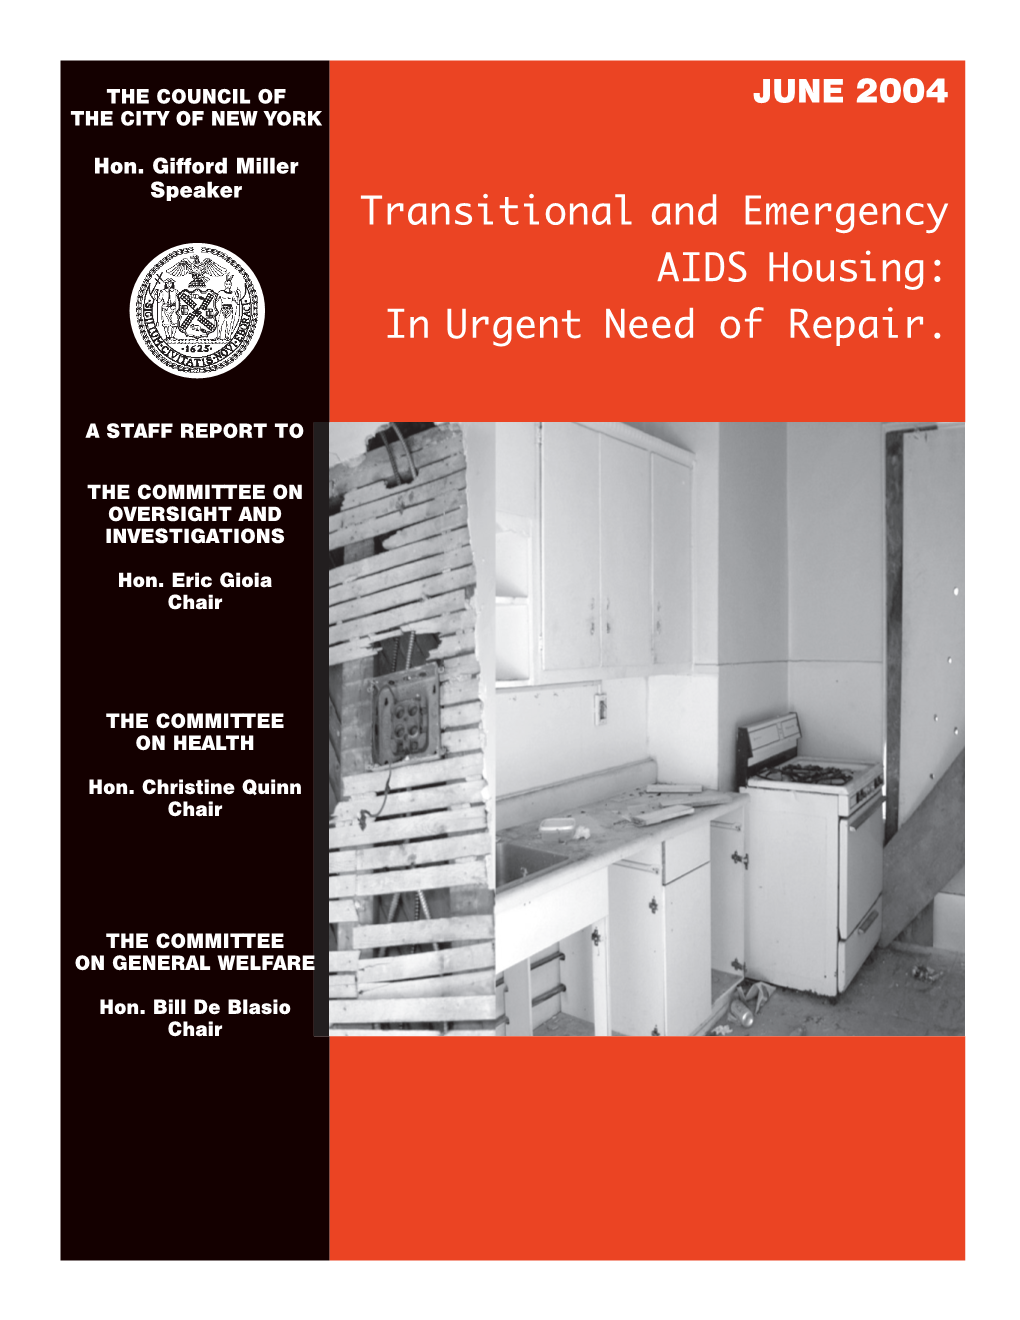 Transitional and Emergency AIDS Housing: in Urgent Need of Repair